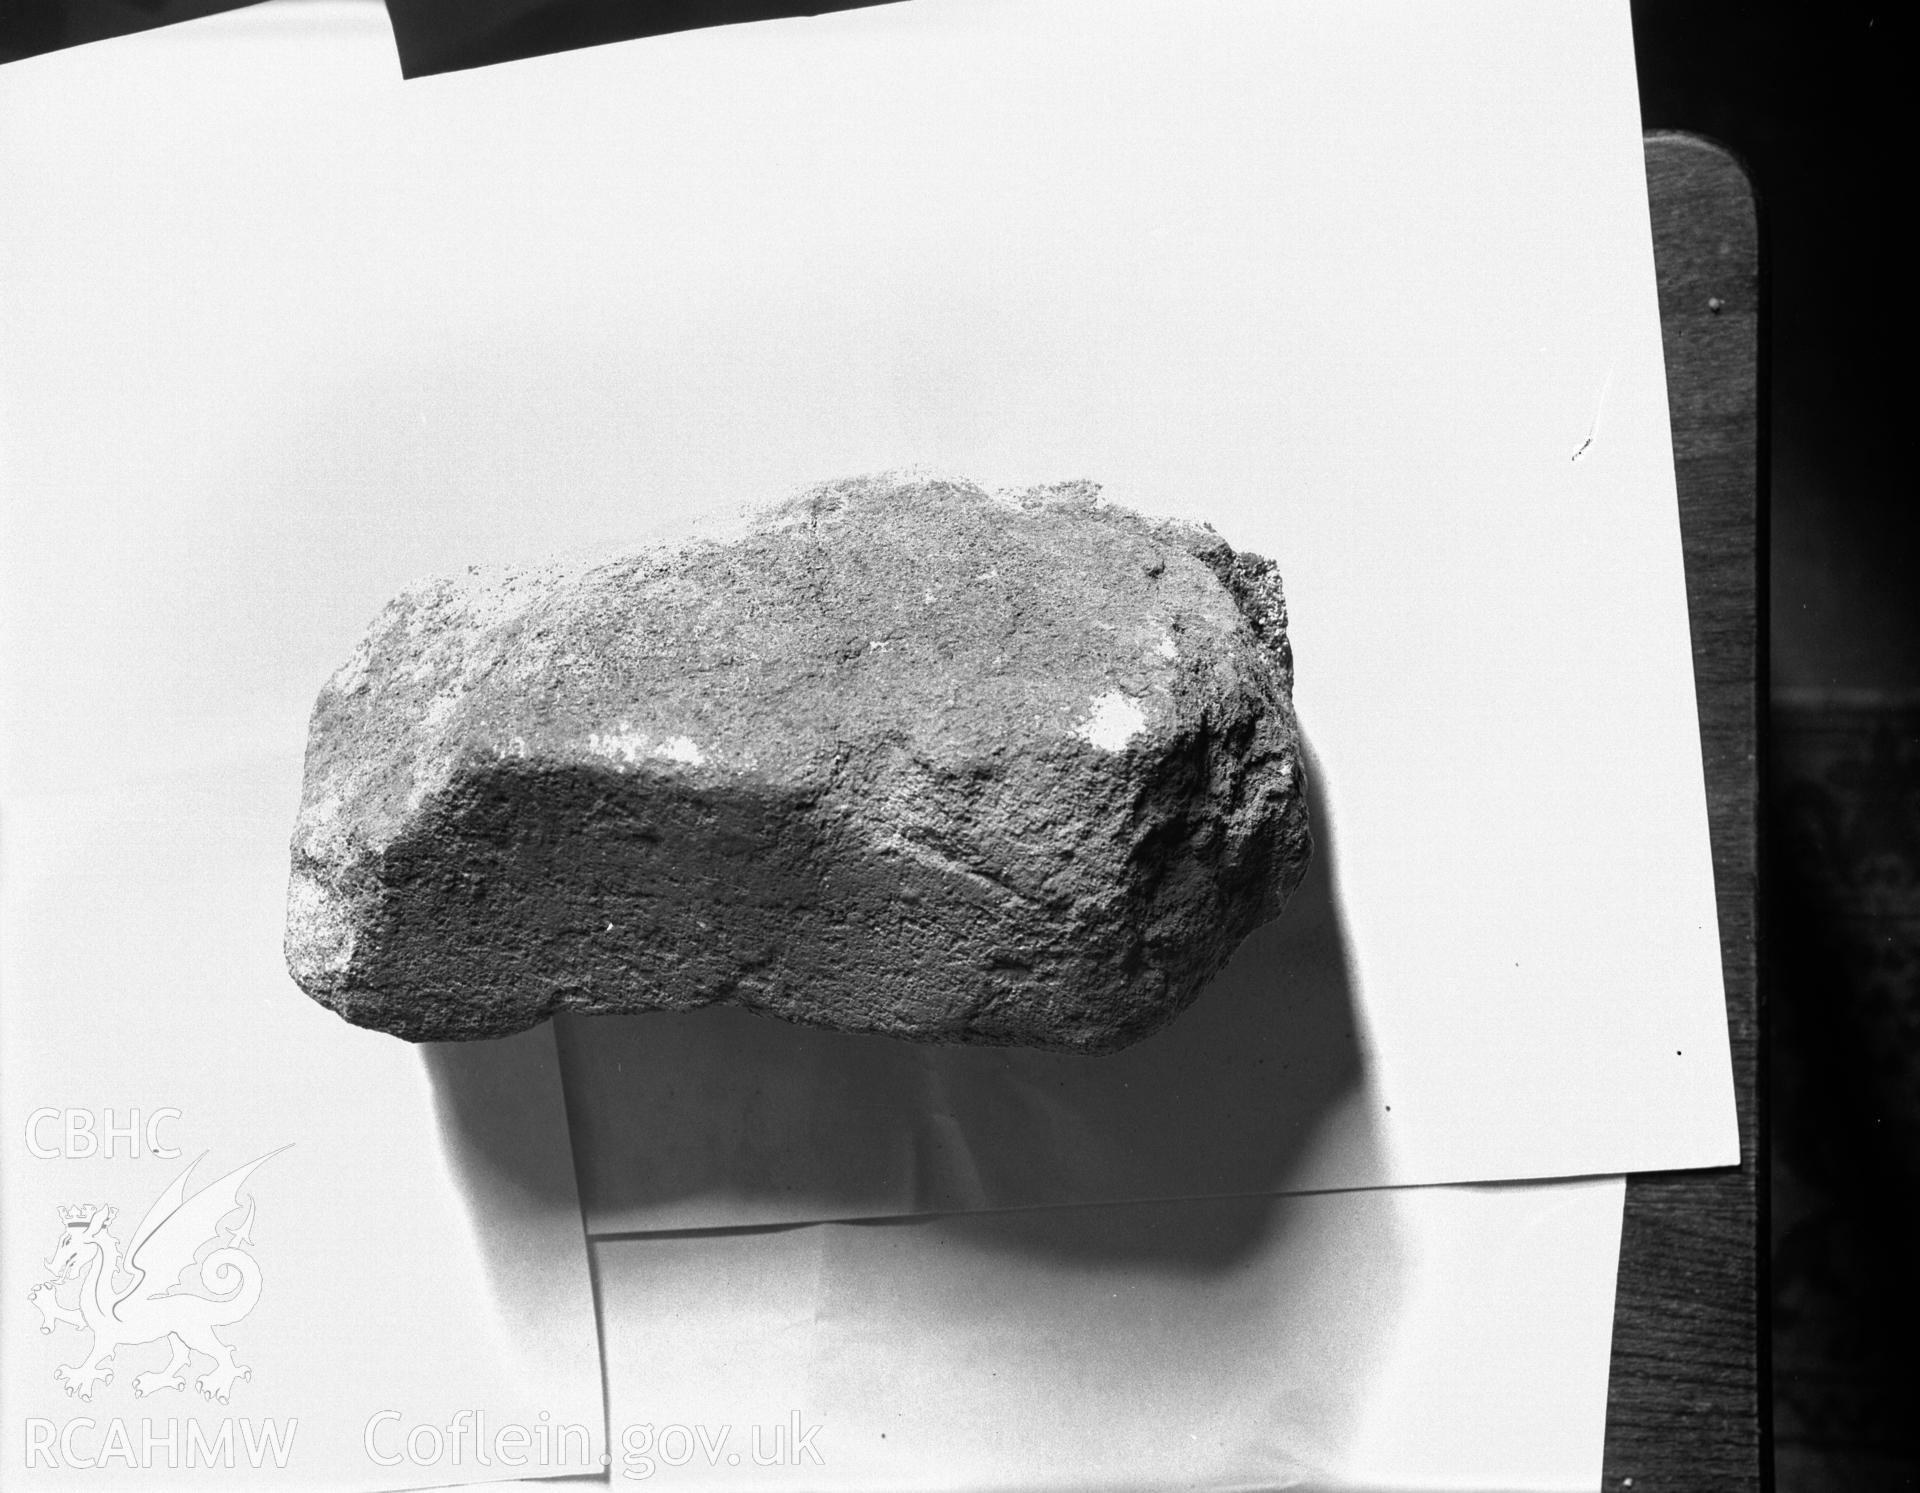 Digitised image showing stone from the chamber, produced from nitrate negative.